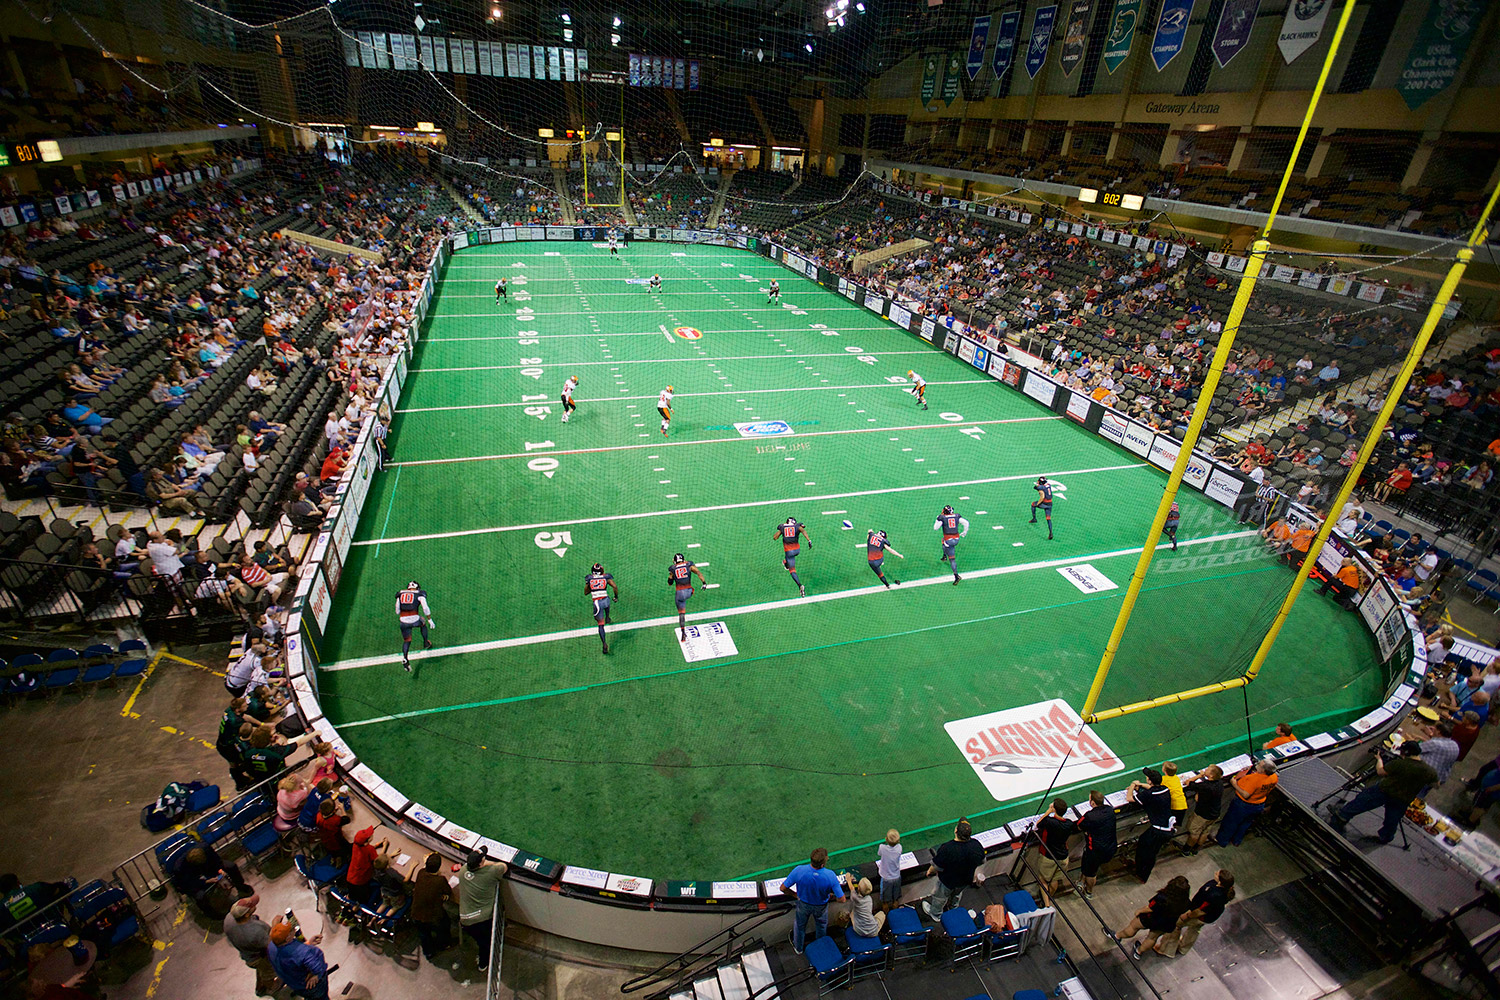 Lease agreement reached for arena football team in Portland